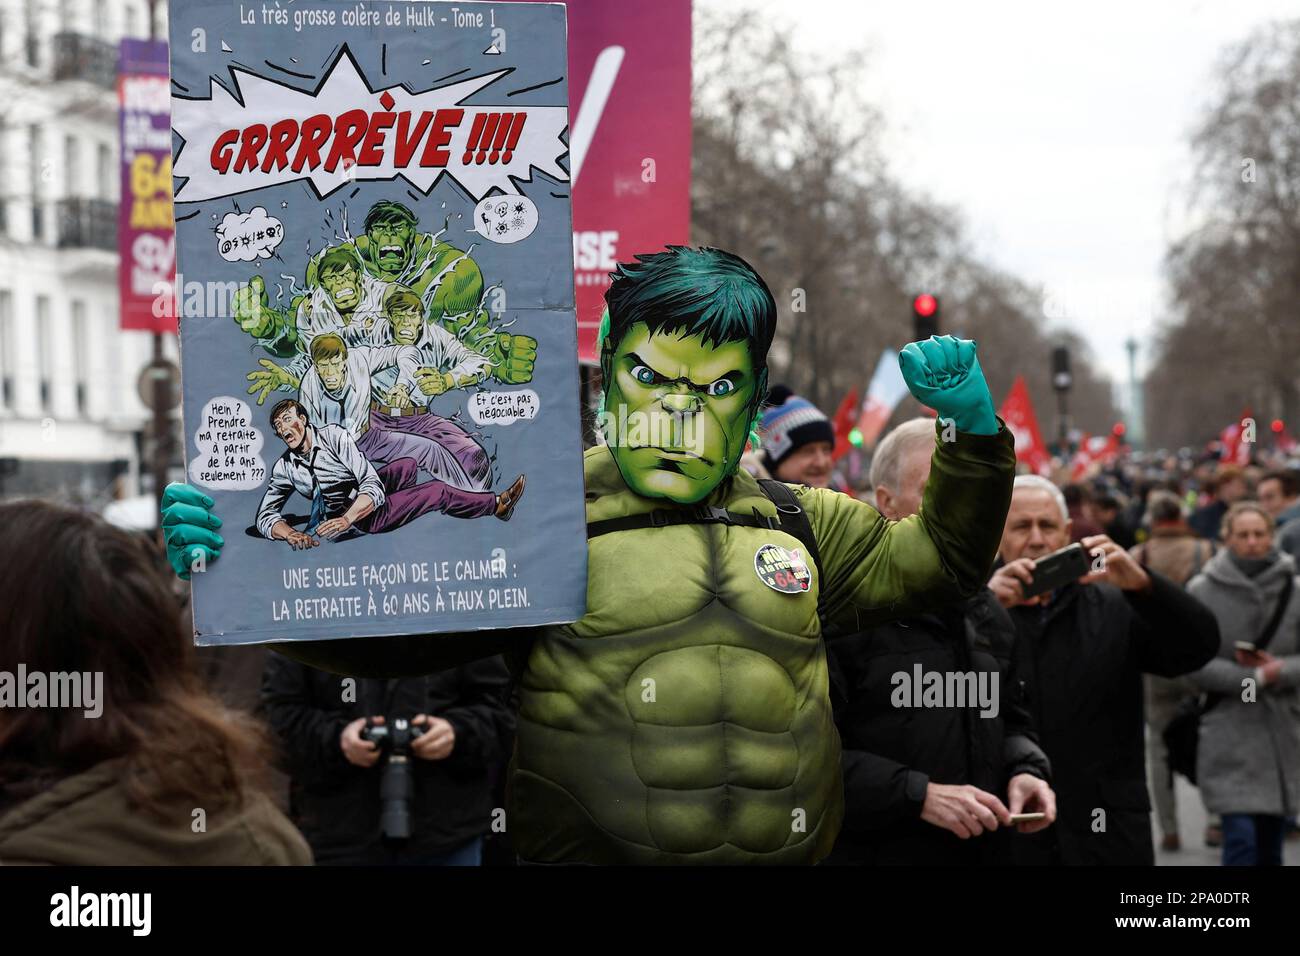 A demonstrator dressed as The Hulk comic book character holds a sign at a protest against the government's pension reform plan in Paris, France, March 11, 2023. REUTERS/Benoit Tessier Stock Photo